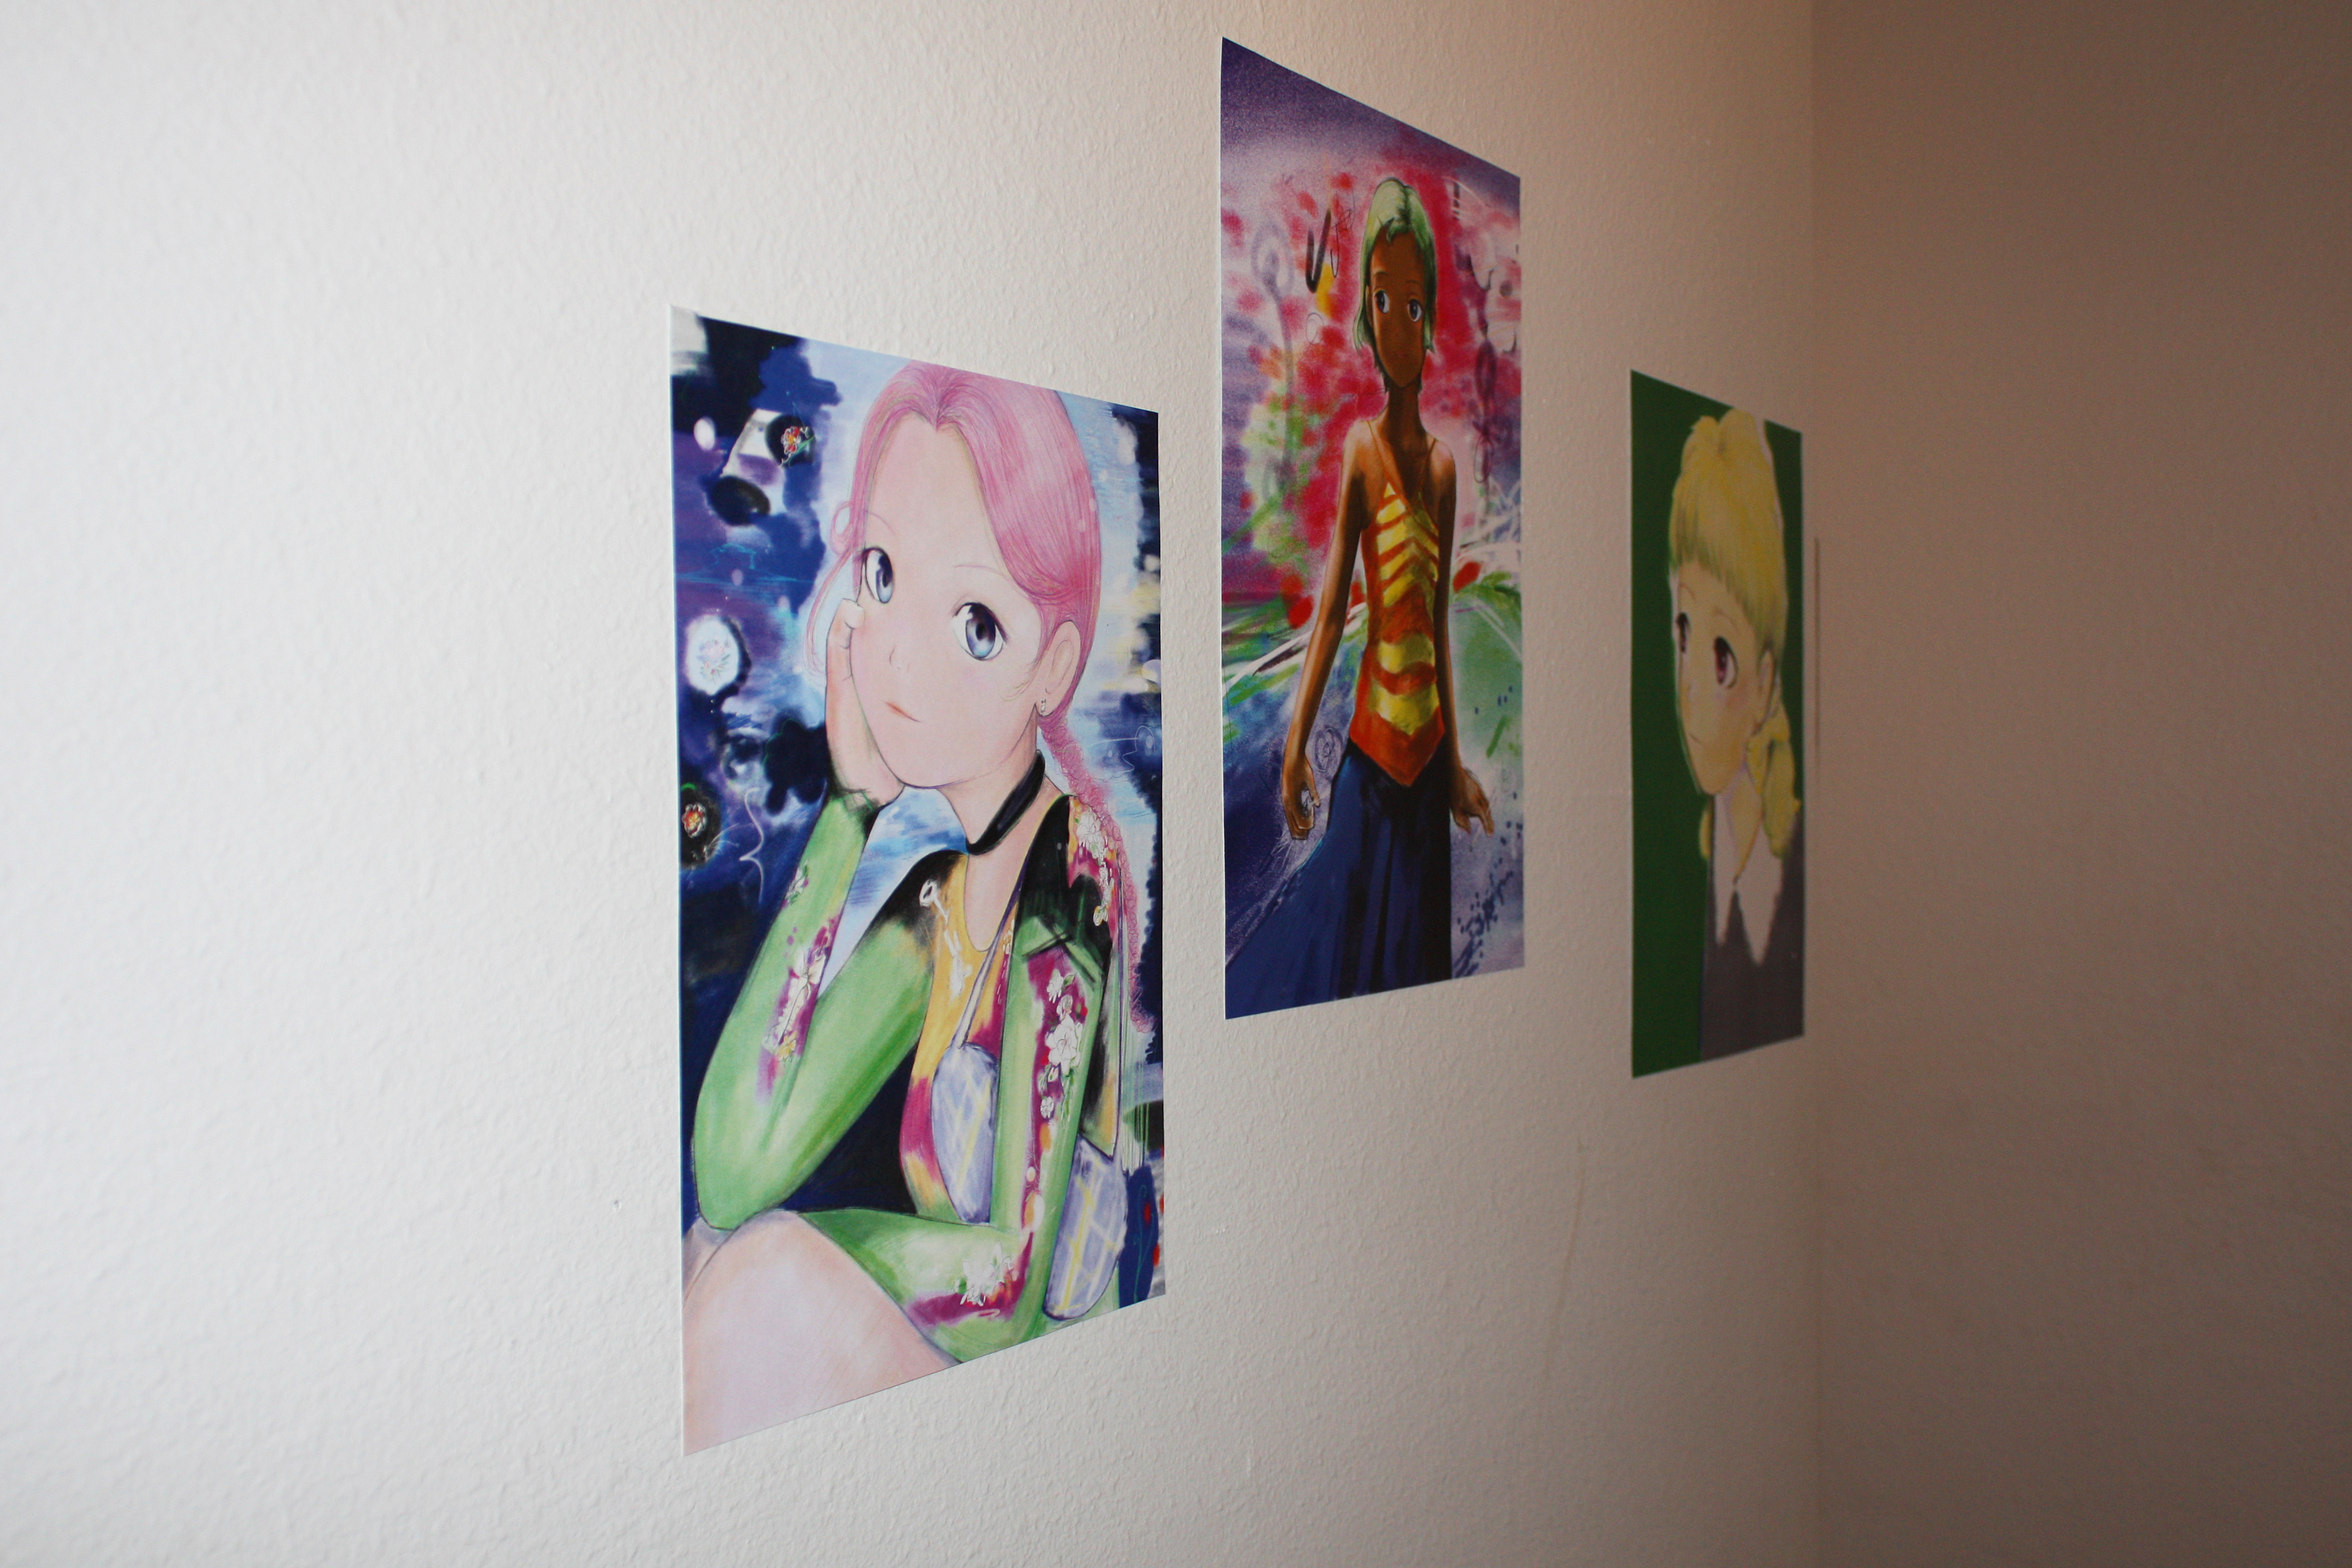 Three prints of anime style female figures hung in a narrow white hallway